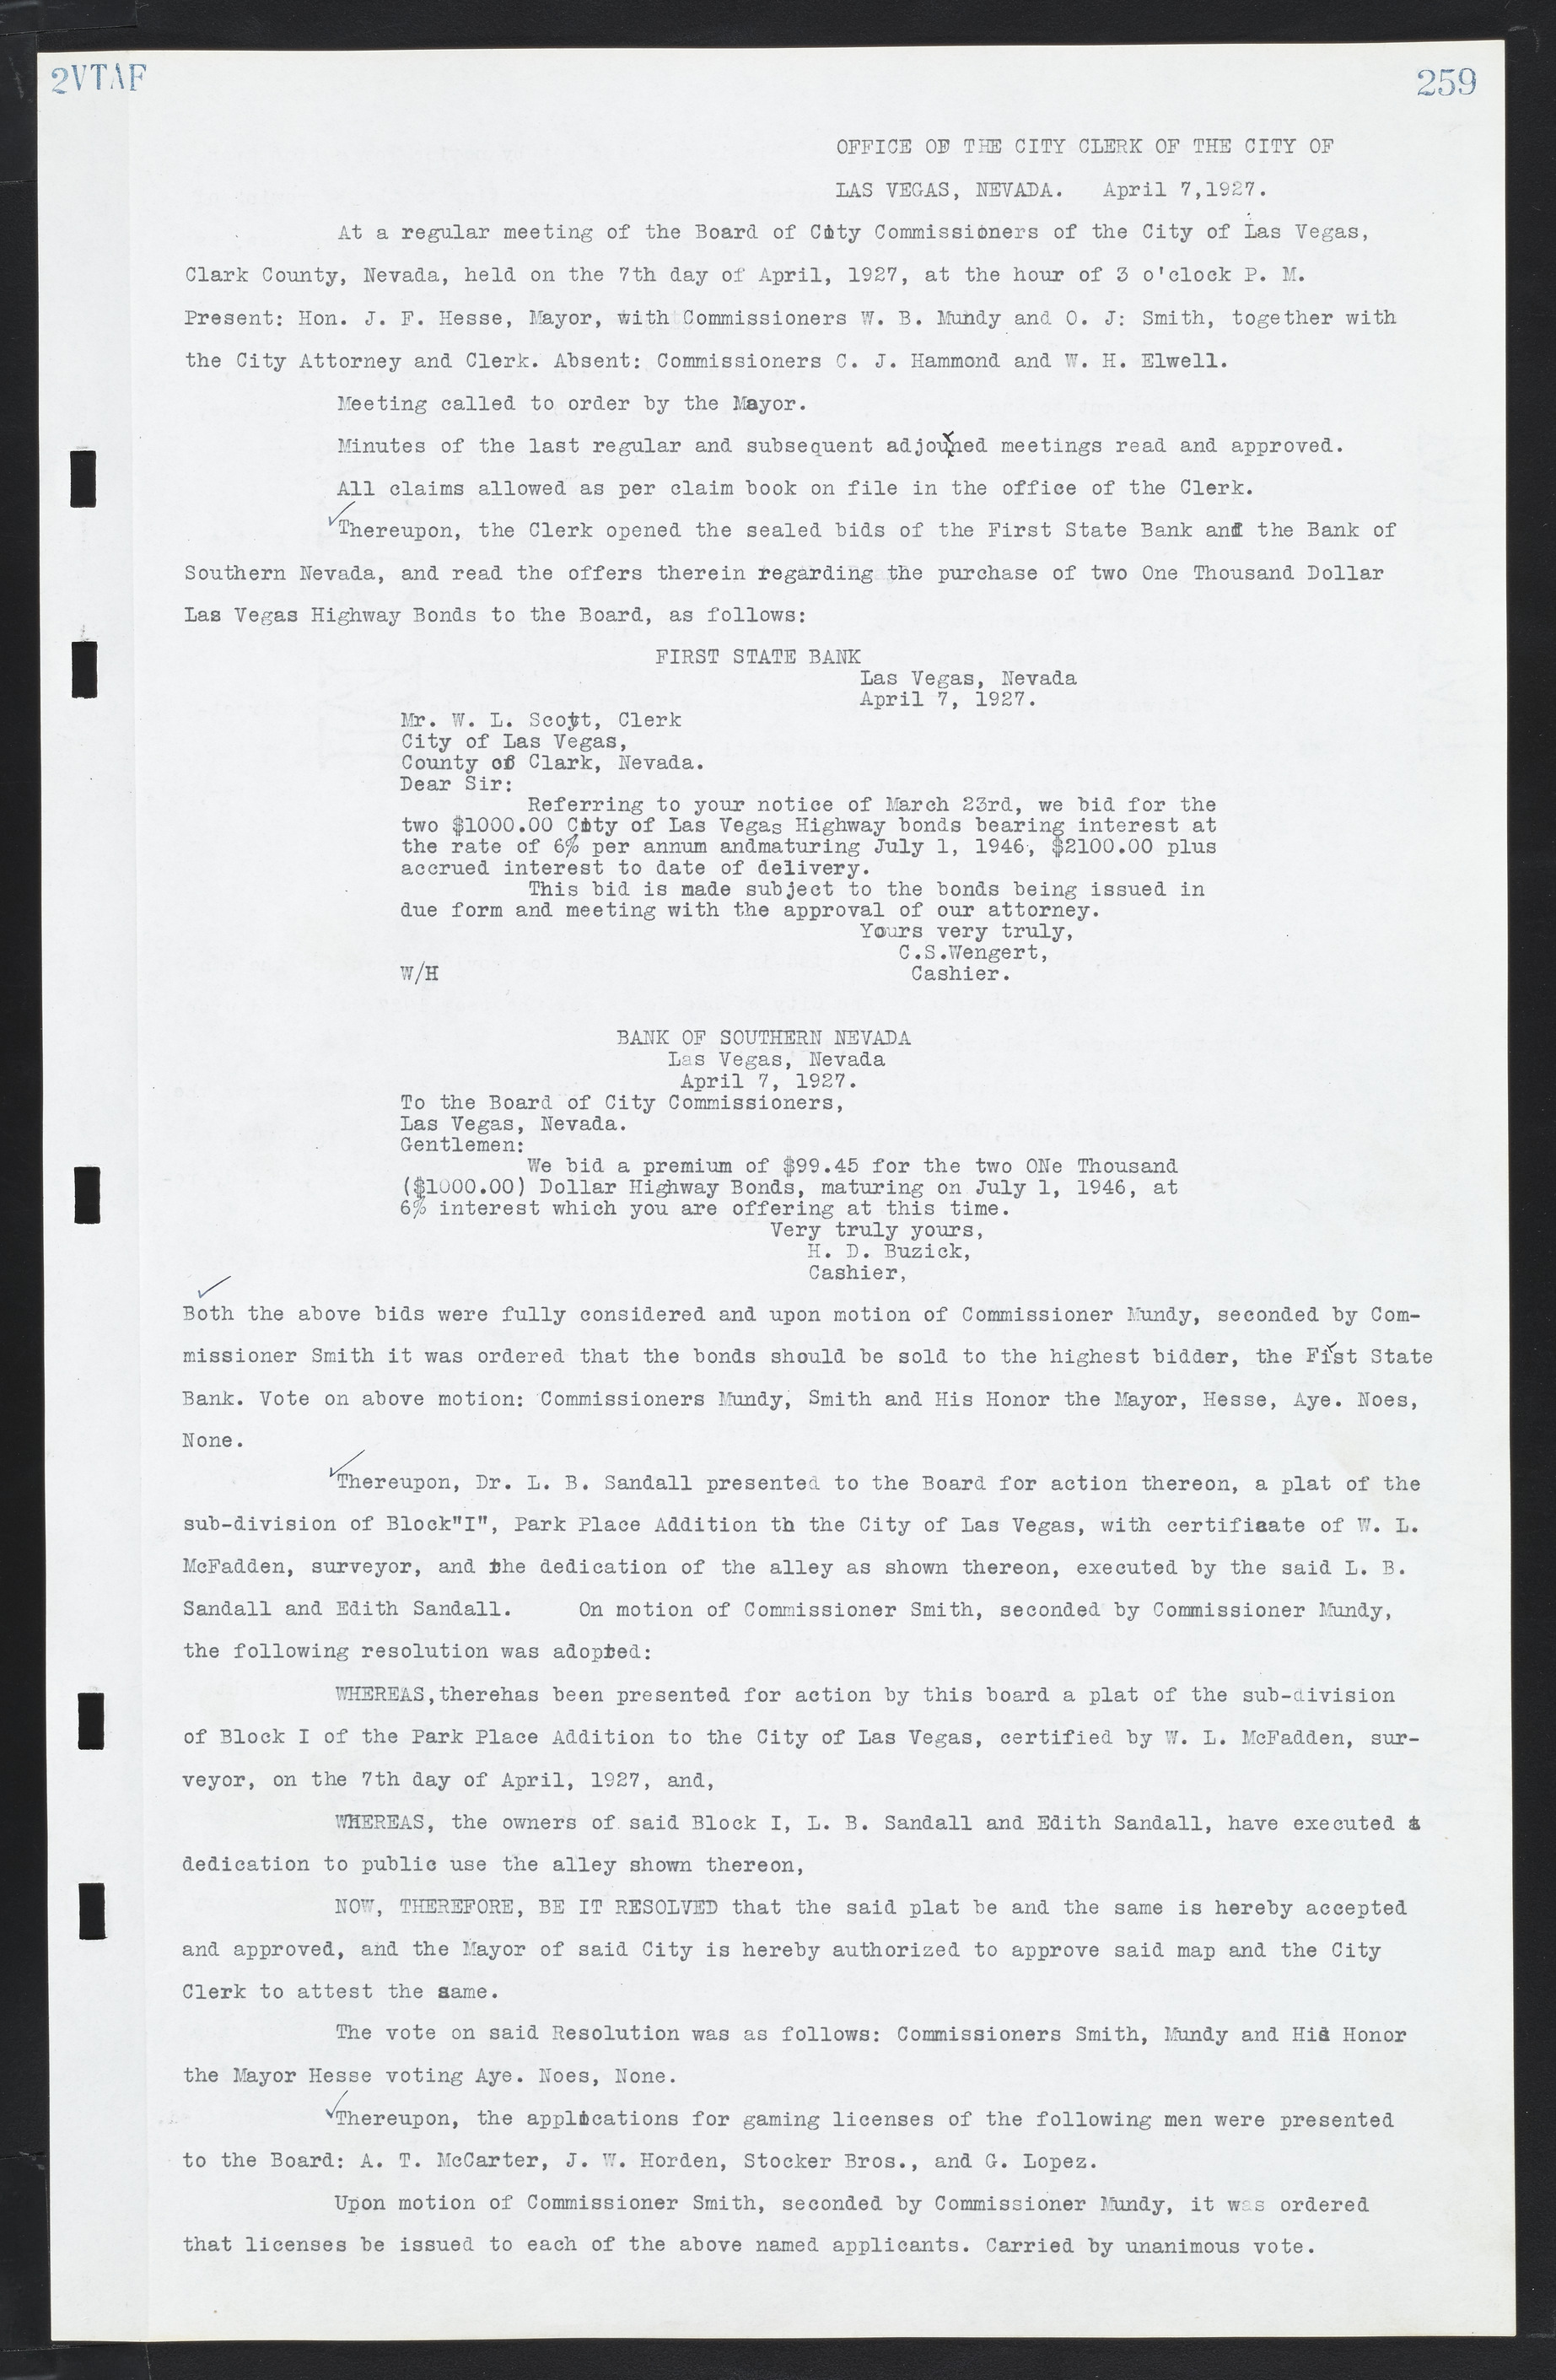 Las Vegas City Commission Minutes, March 1, 1922 to May 10, 1929, lvc000002-268